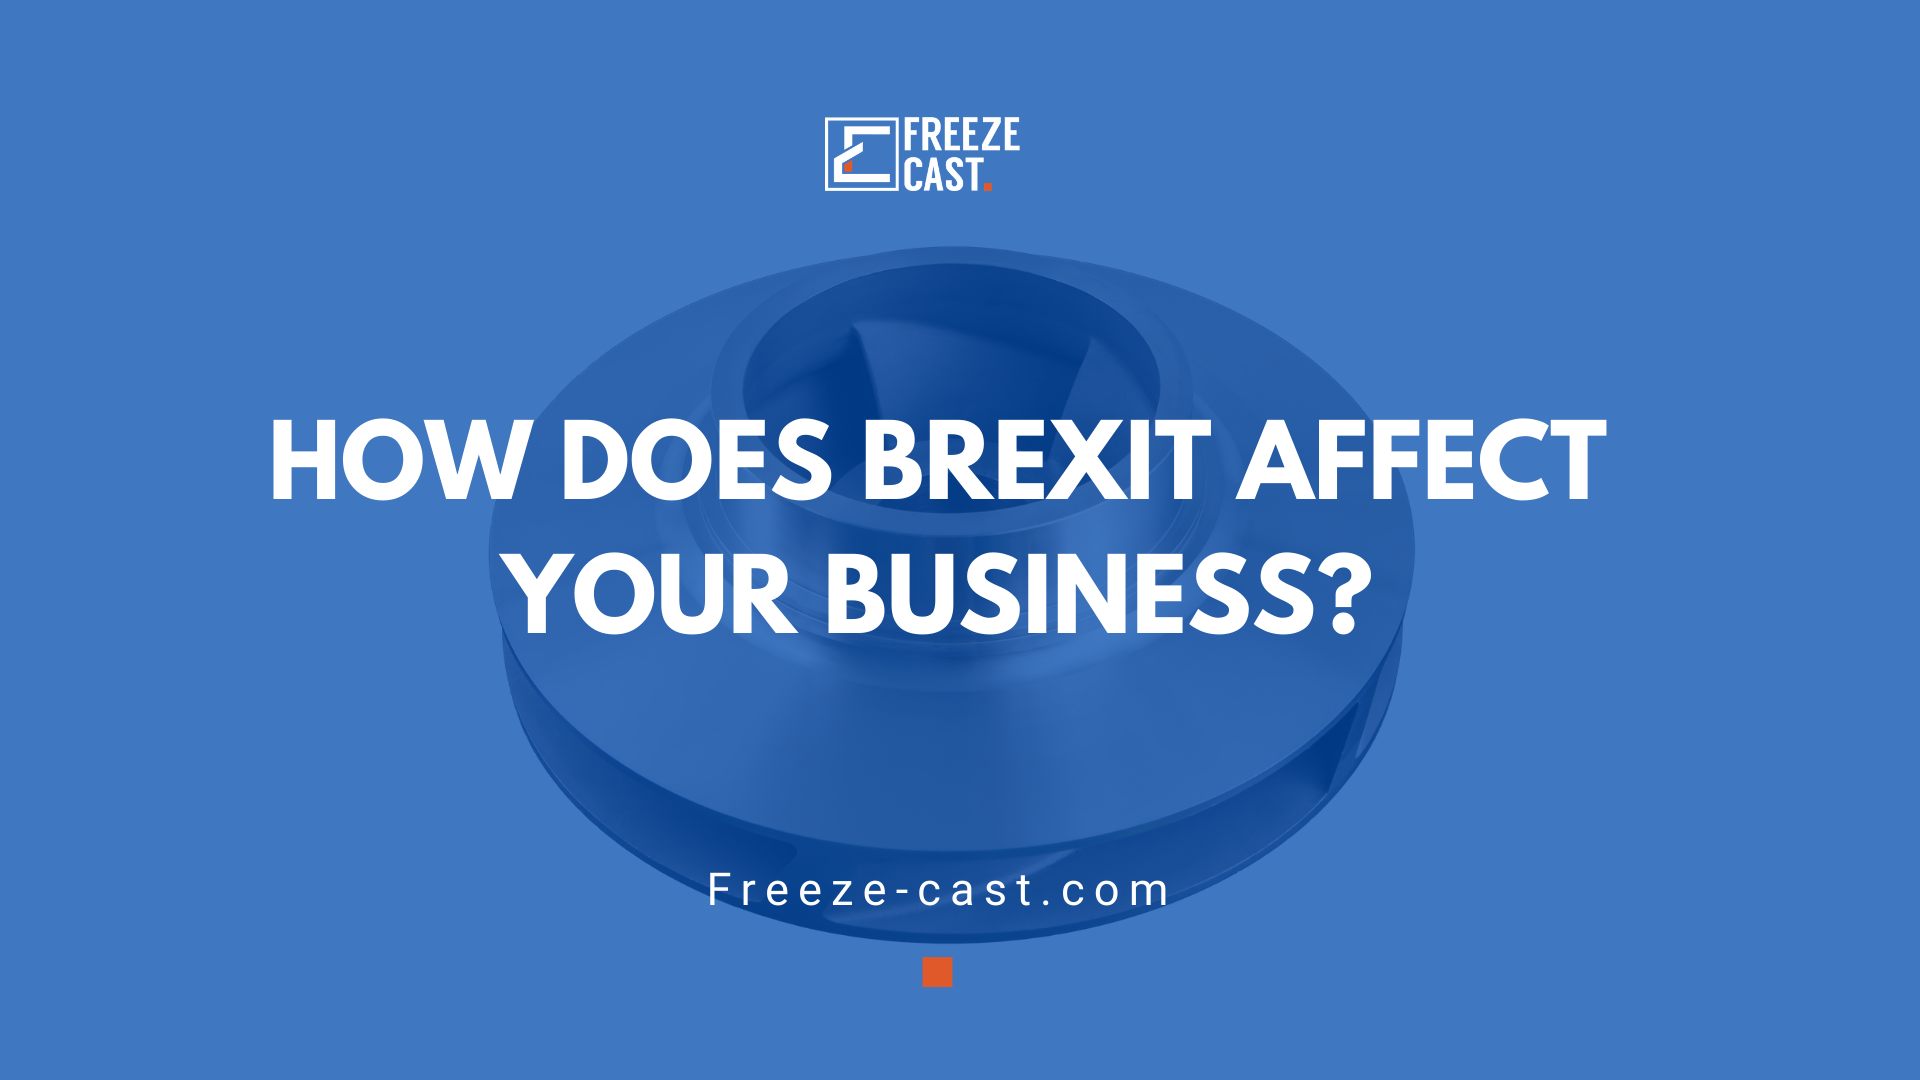 How does BREXIT affect your business?